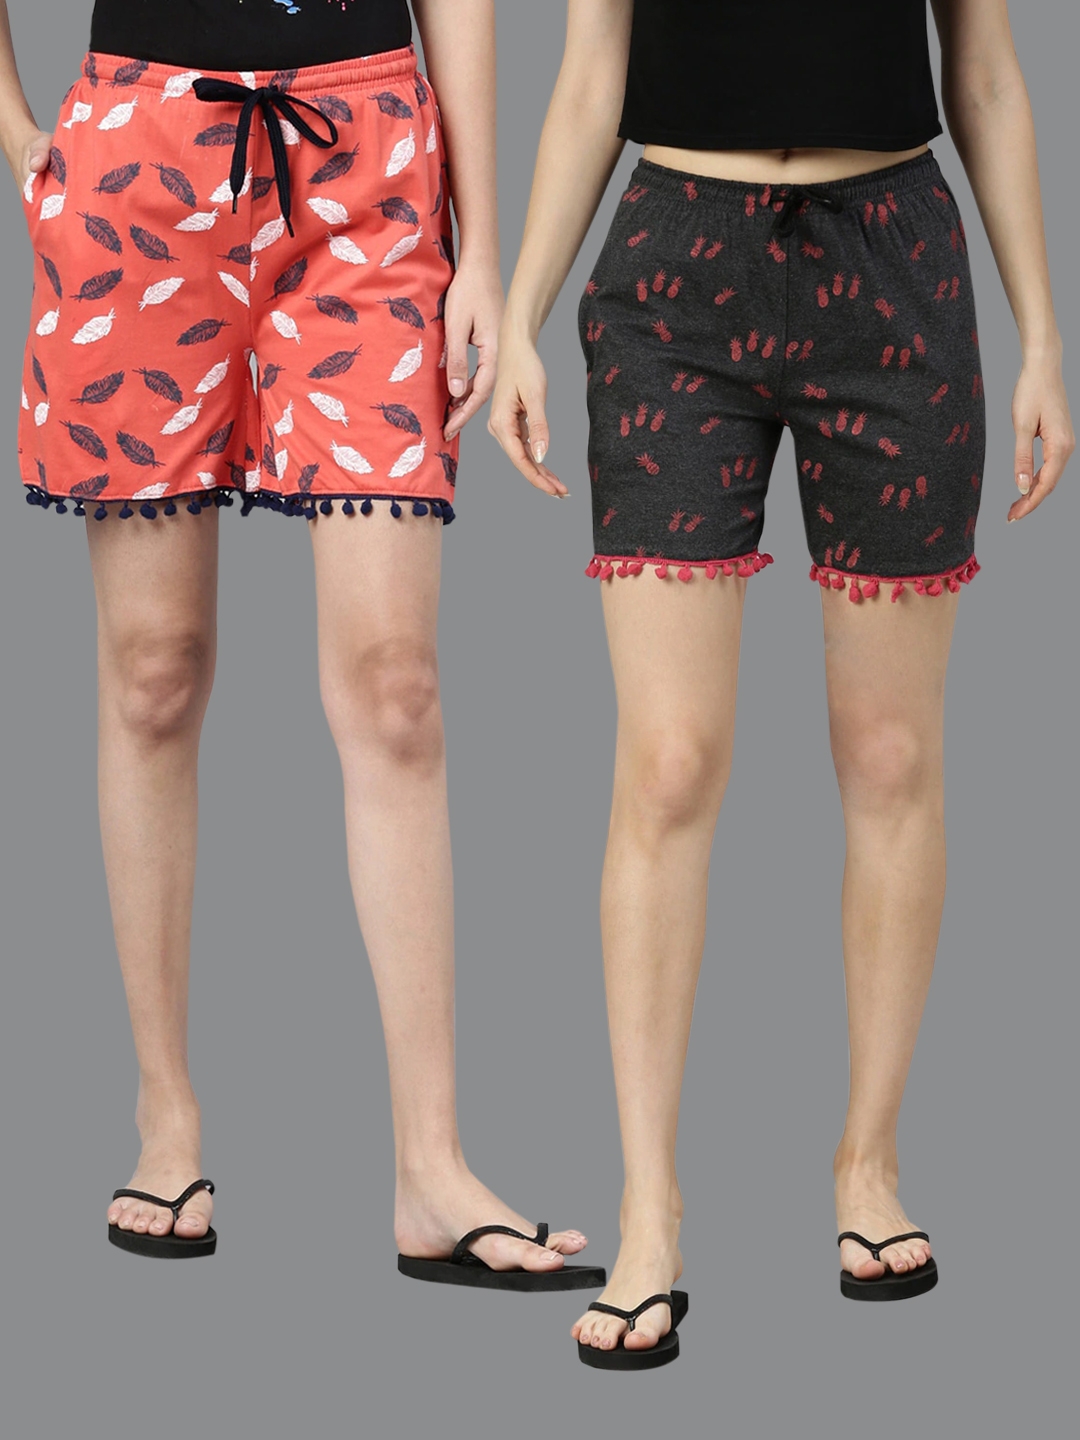 Kryptic | Kryptic Women's 100% Cotton Printed Shorts - Pack of 2